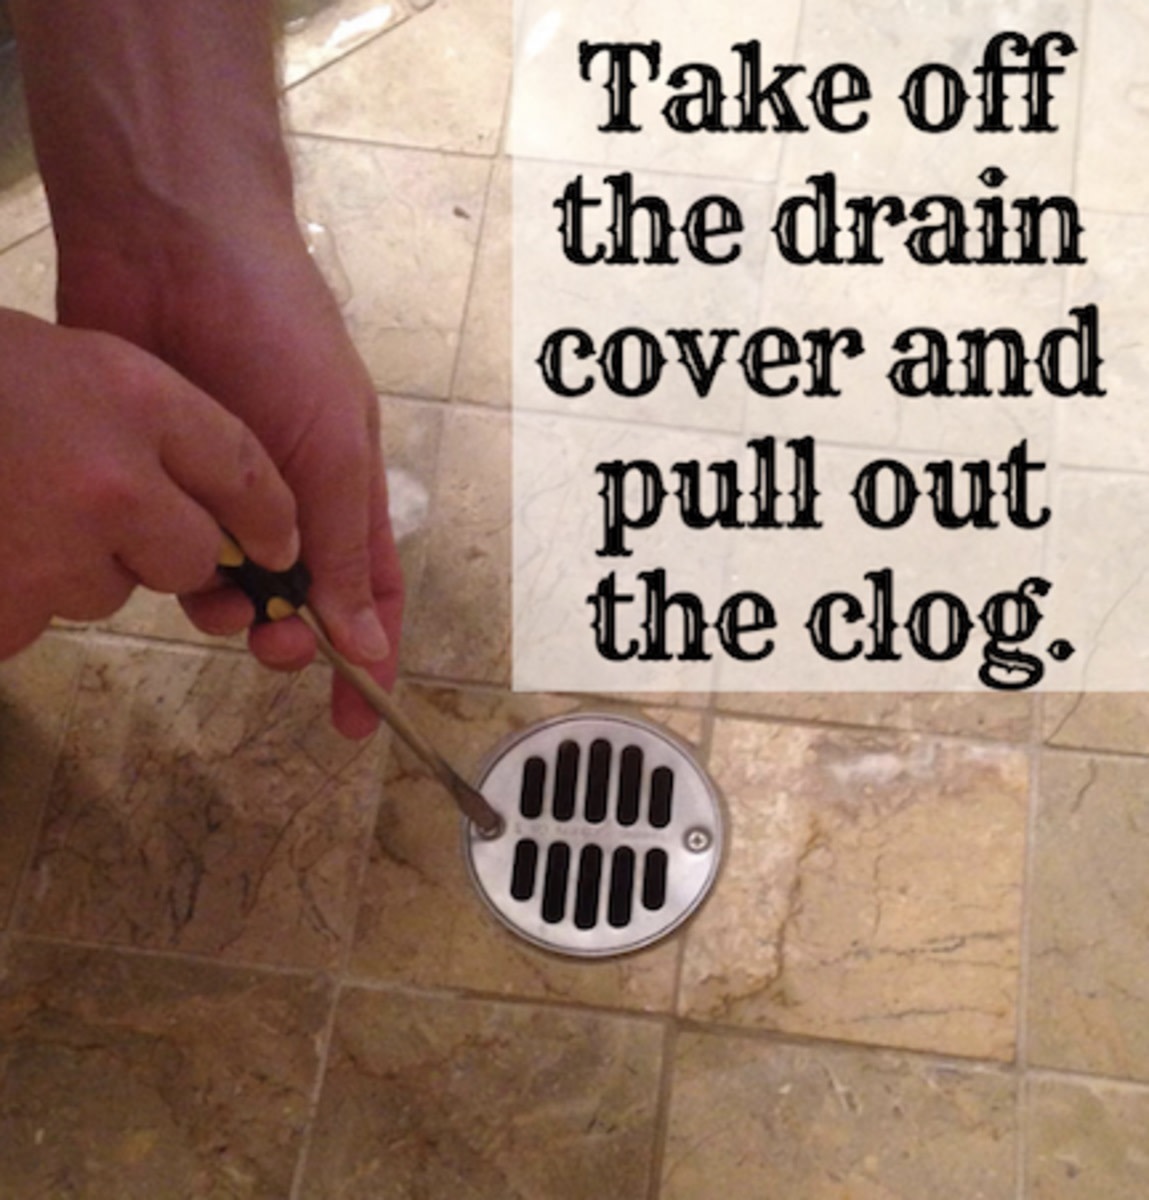 How Do I Know If My Shower Drain Is Clogged? (And How to Fix It!)